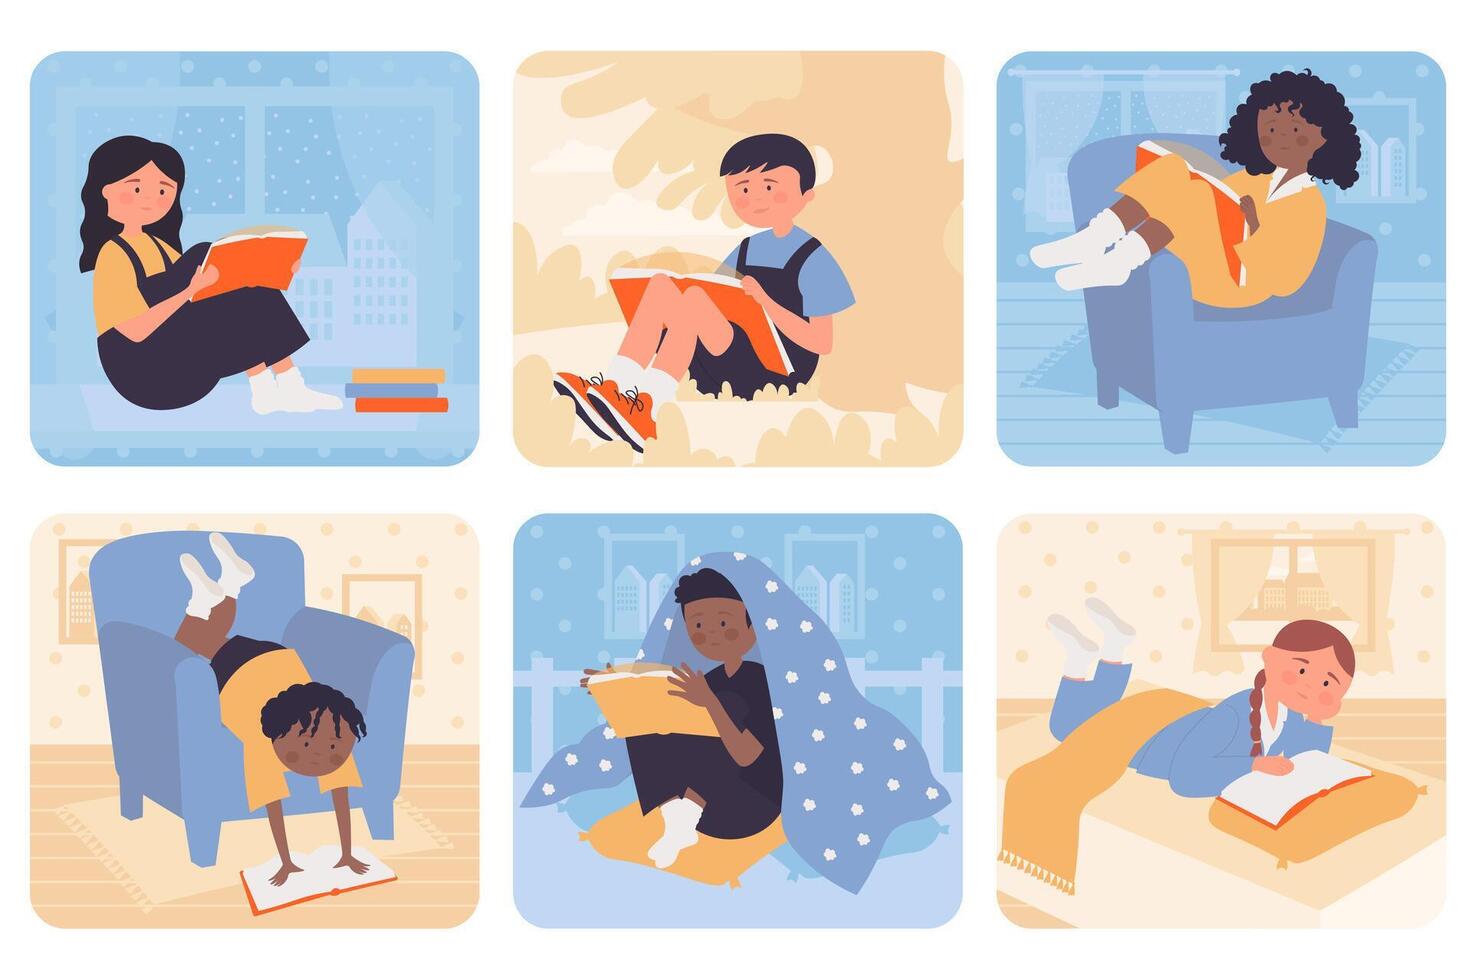 Children reading books concept with people situation set in flat web design. Bundle scenes with multiethnic diverse characters spend time with literature, pupils read textbook. Vector illustrations.